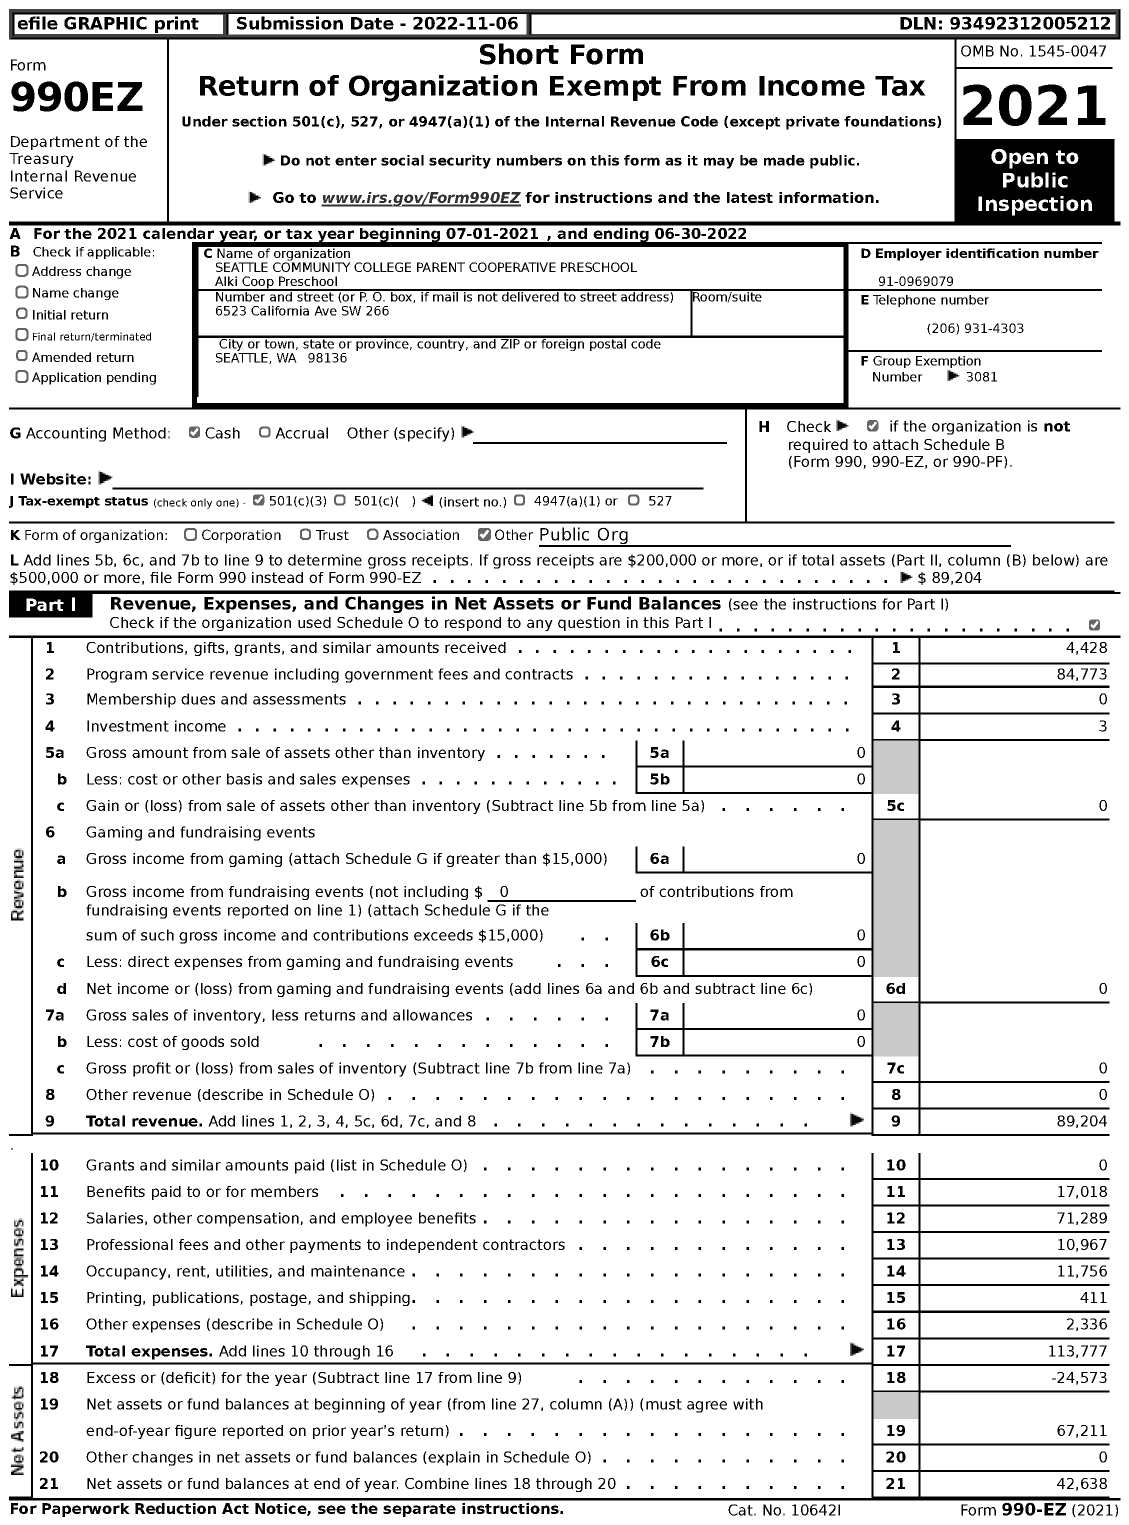 Image of first page of 2021 Form 990EZ for SEATTLE COMMUNITY COLLEGE PARENT COOPERATIVE PRESCHOOL Alki COOPERATIVE PRESCHOOL